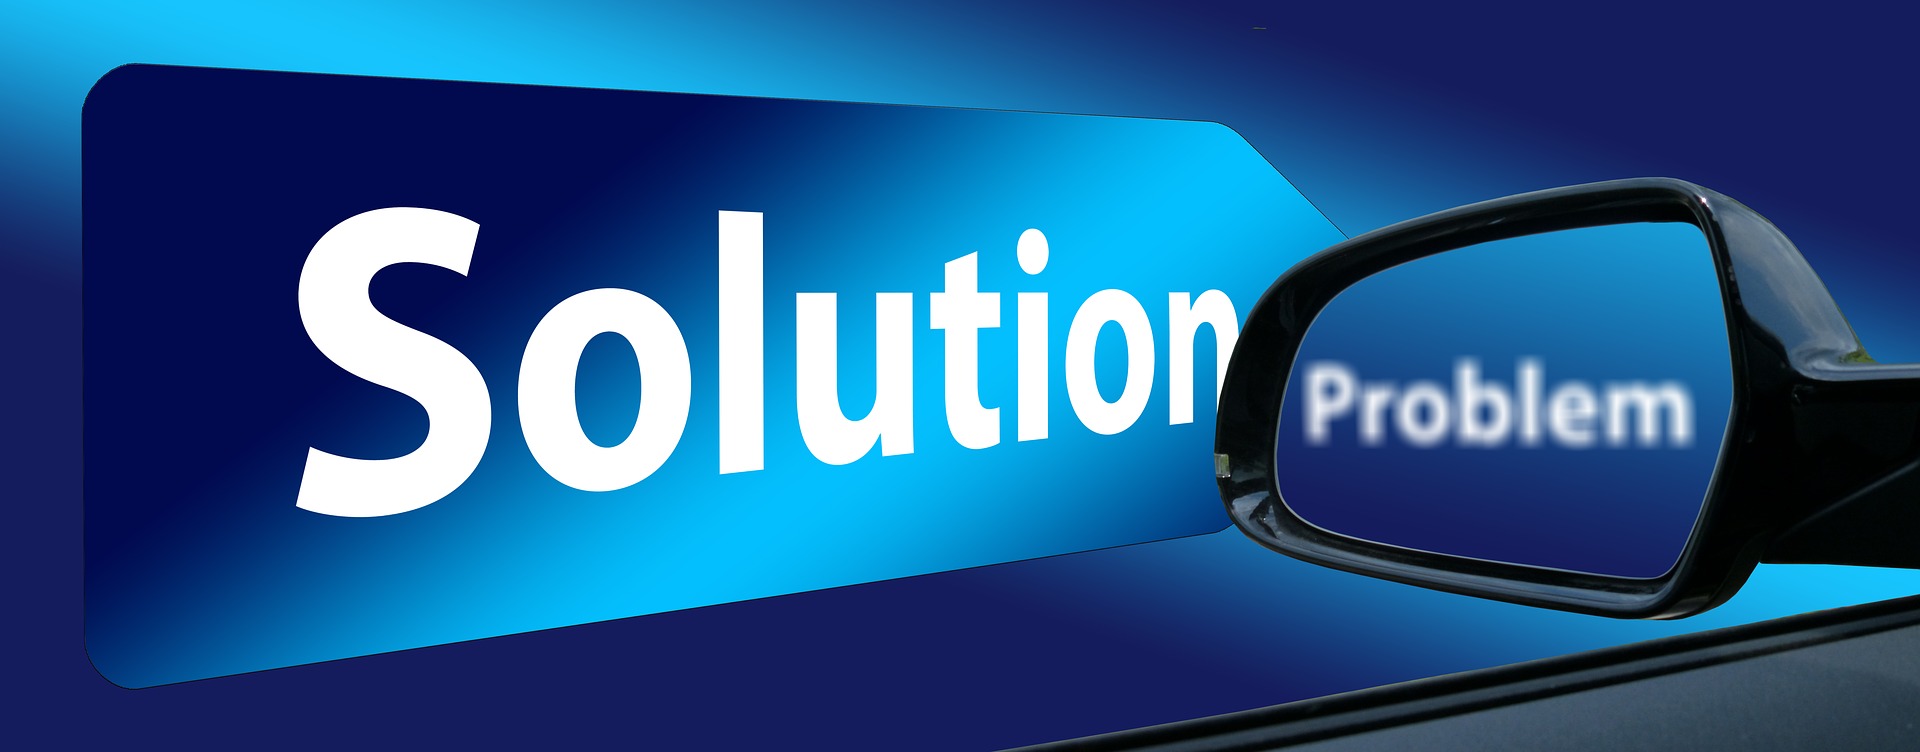 Find solutions for problems